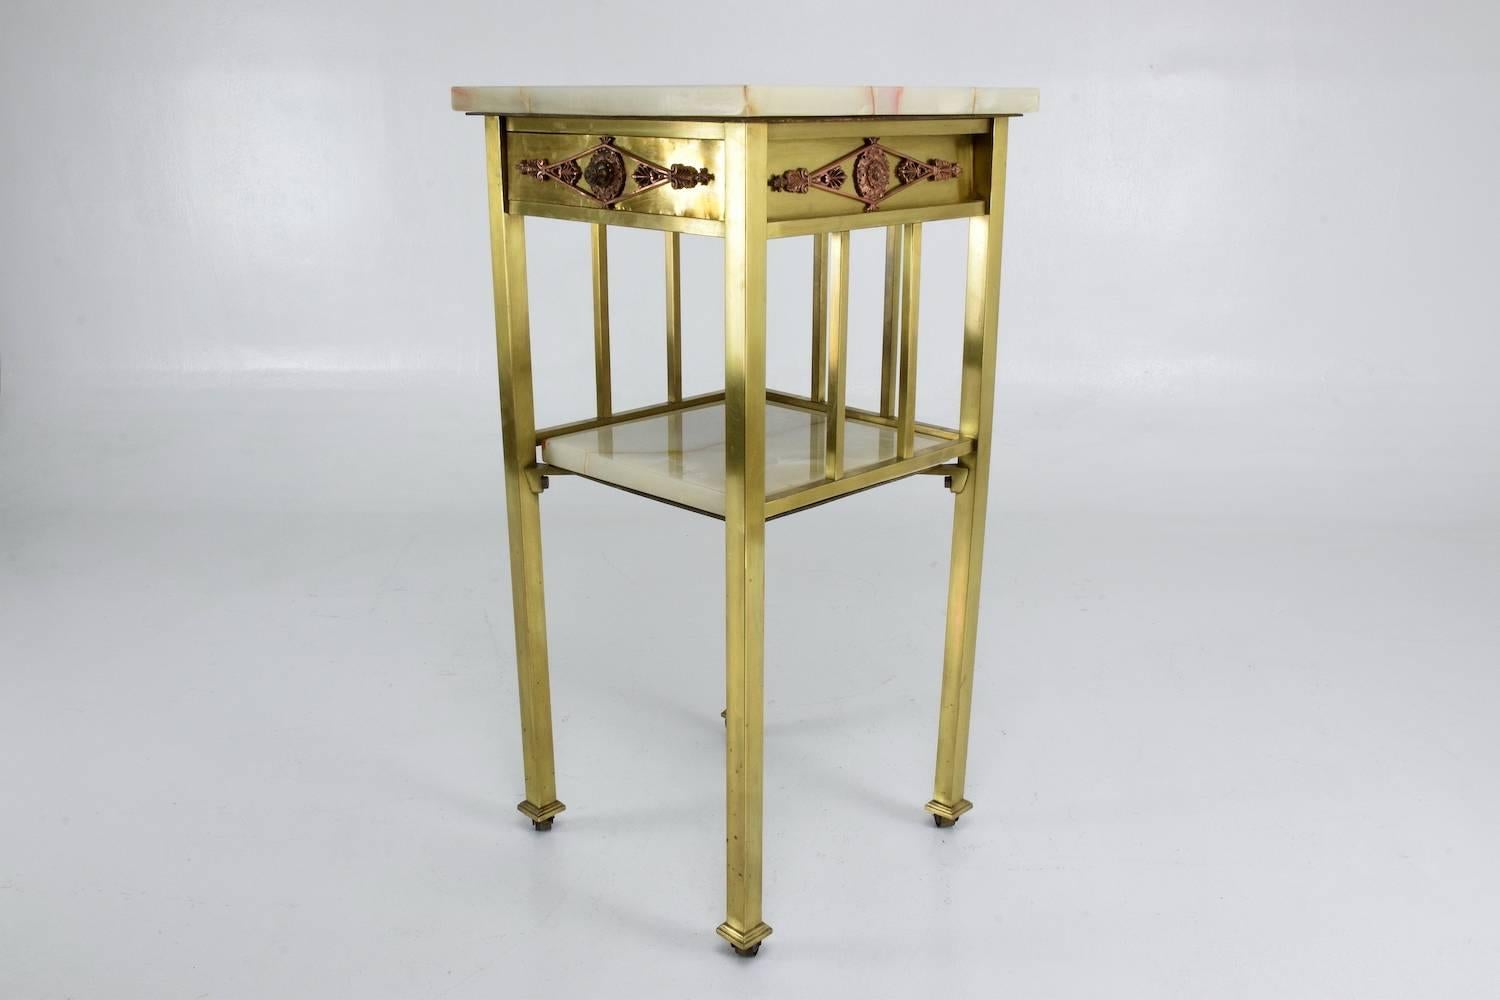 Beautiful 20th century French two-tier polished brass side table, nightstand or étagère with rollers, marble top, and shelf adorned with floral copper details around the upper drawer. 

---
We are an exhibition space and an online destination